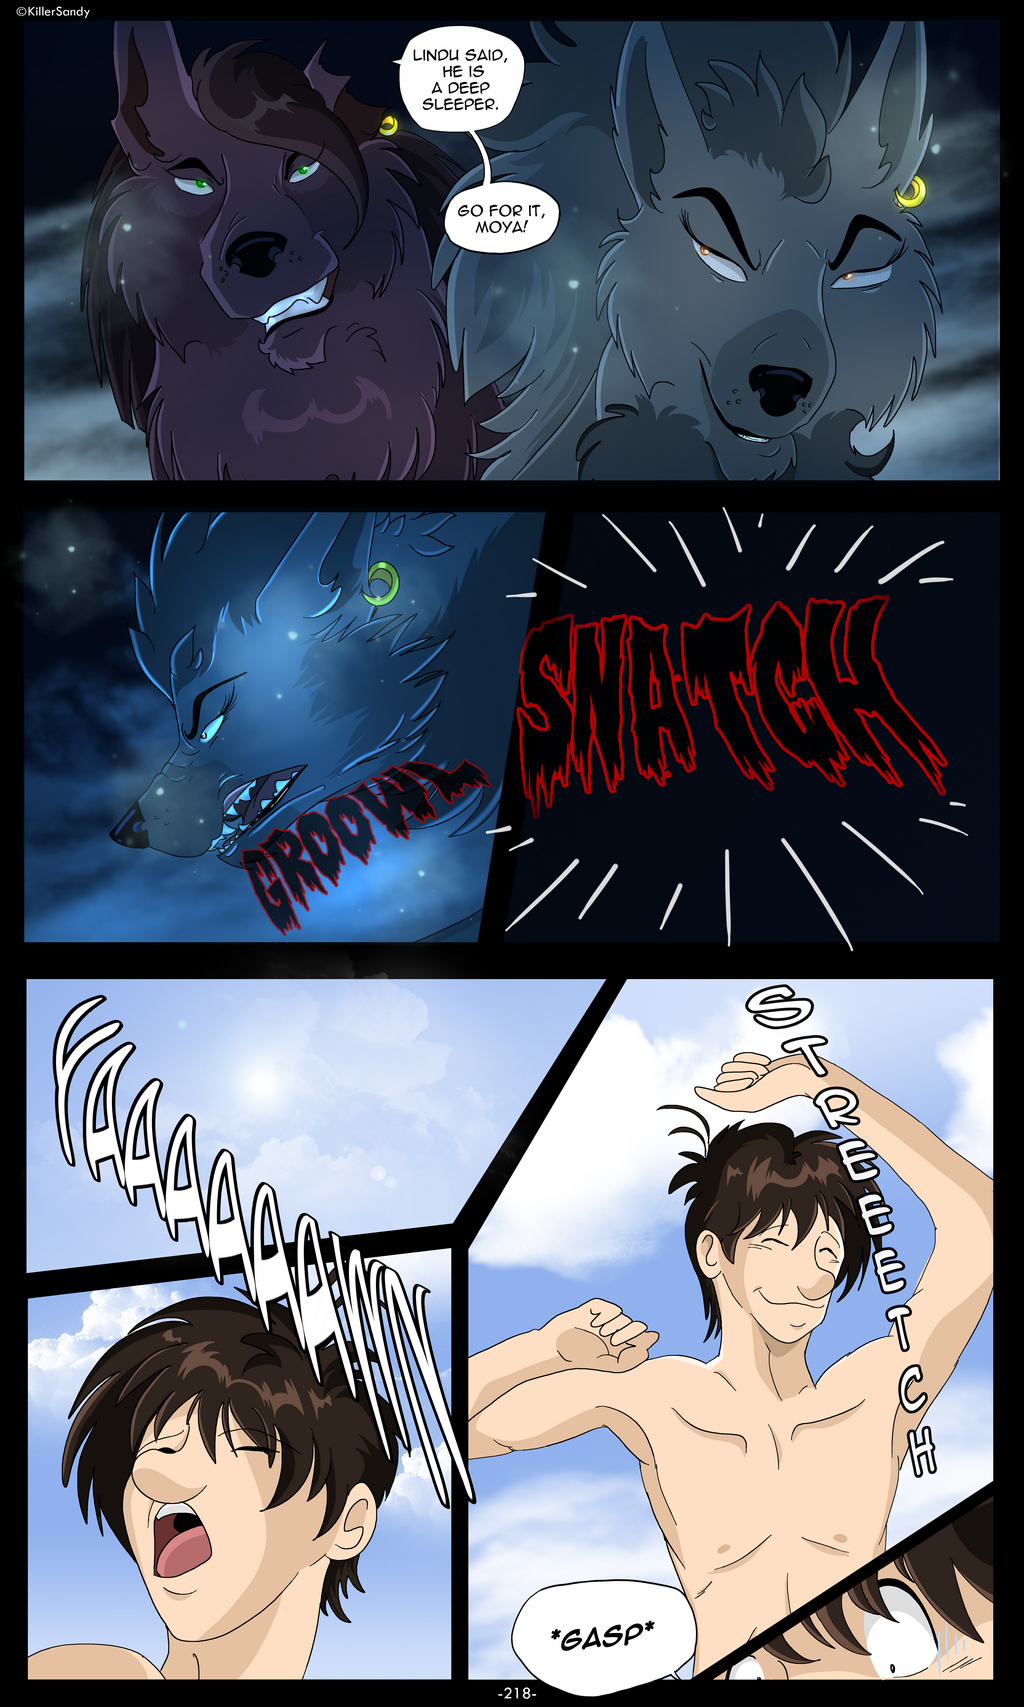 The Prince of the Moonlight Stone page 218